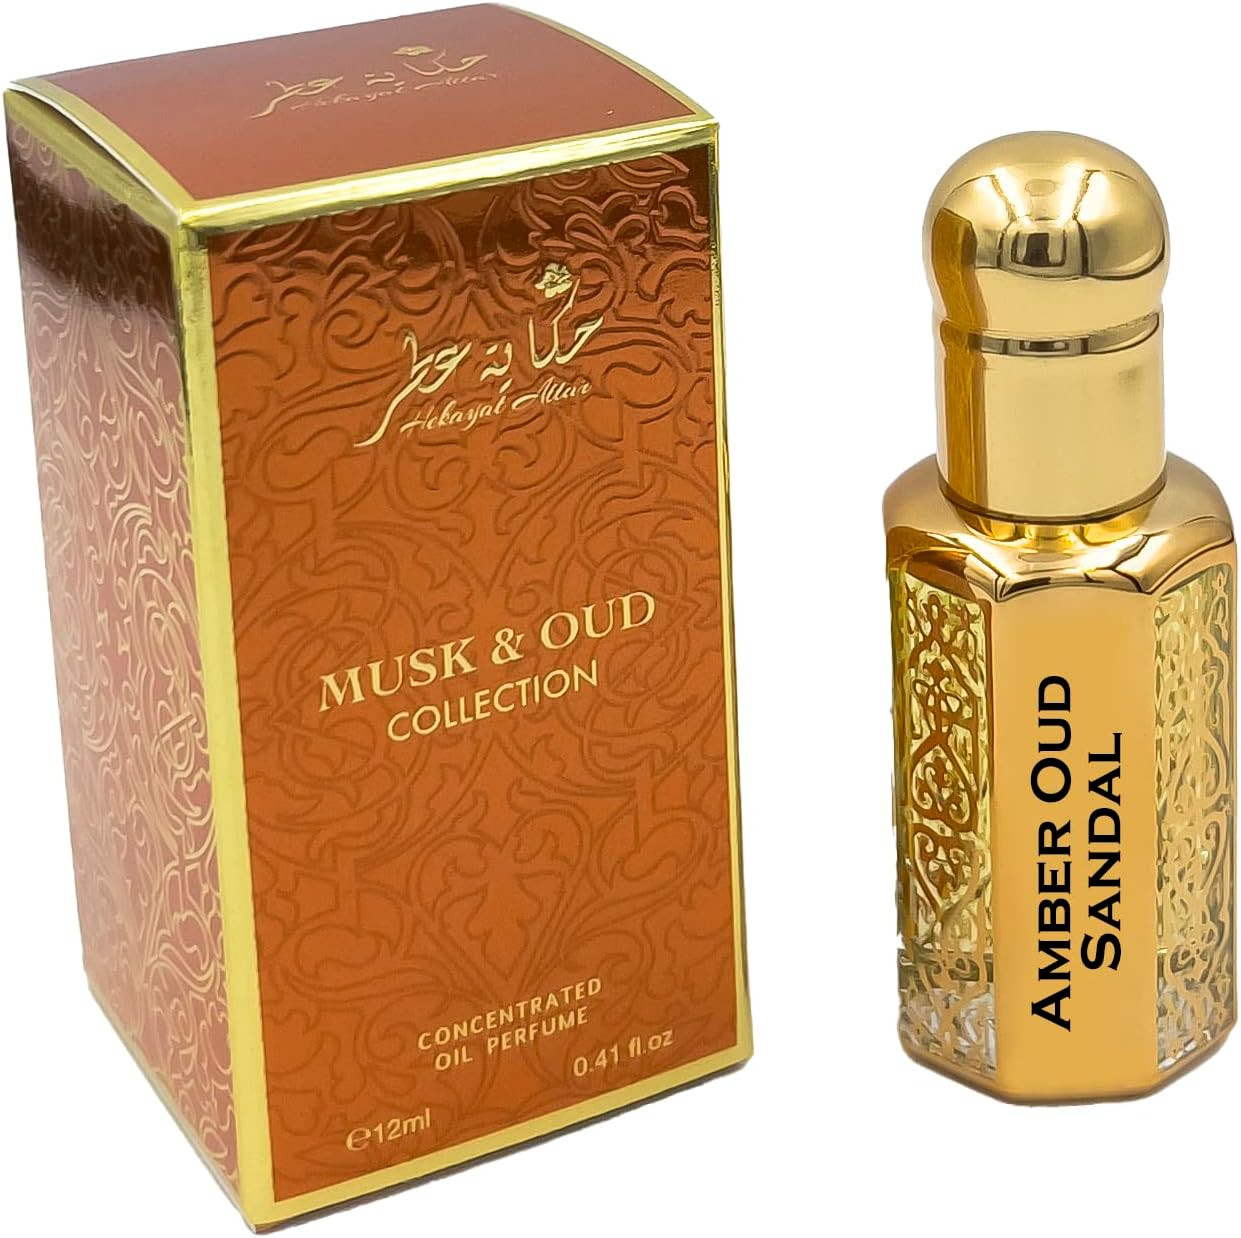 Hekayat Attar Amber Oud Sandal 12 Ml Concentrated Oil Perfume